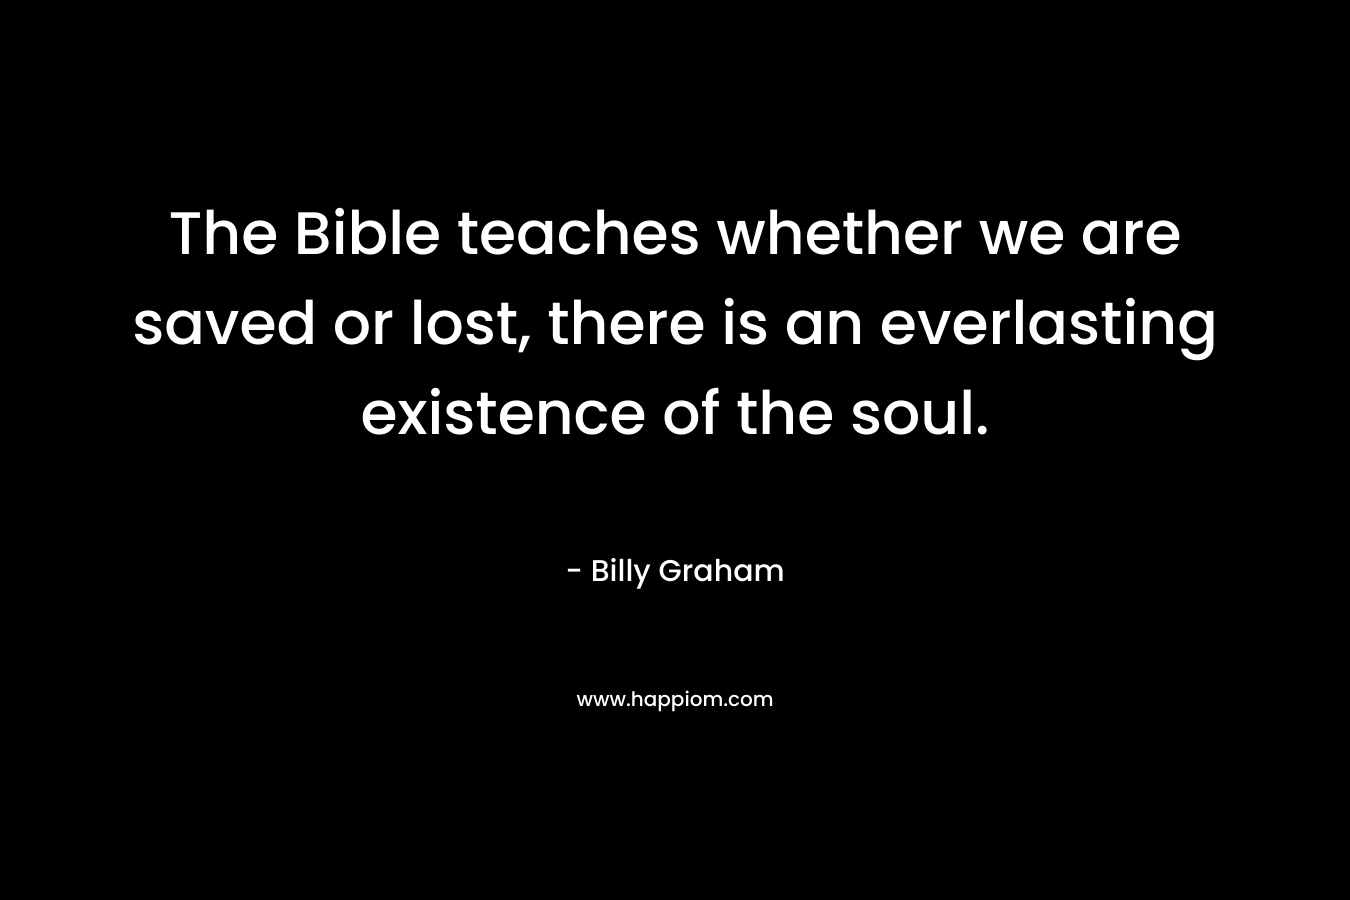 The Bible teaches whether we are saved or lost, there is an everlasting existence of the soul. – Billy Graham